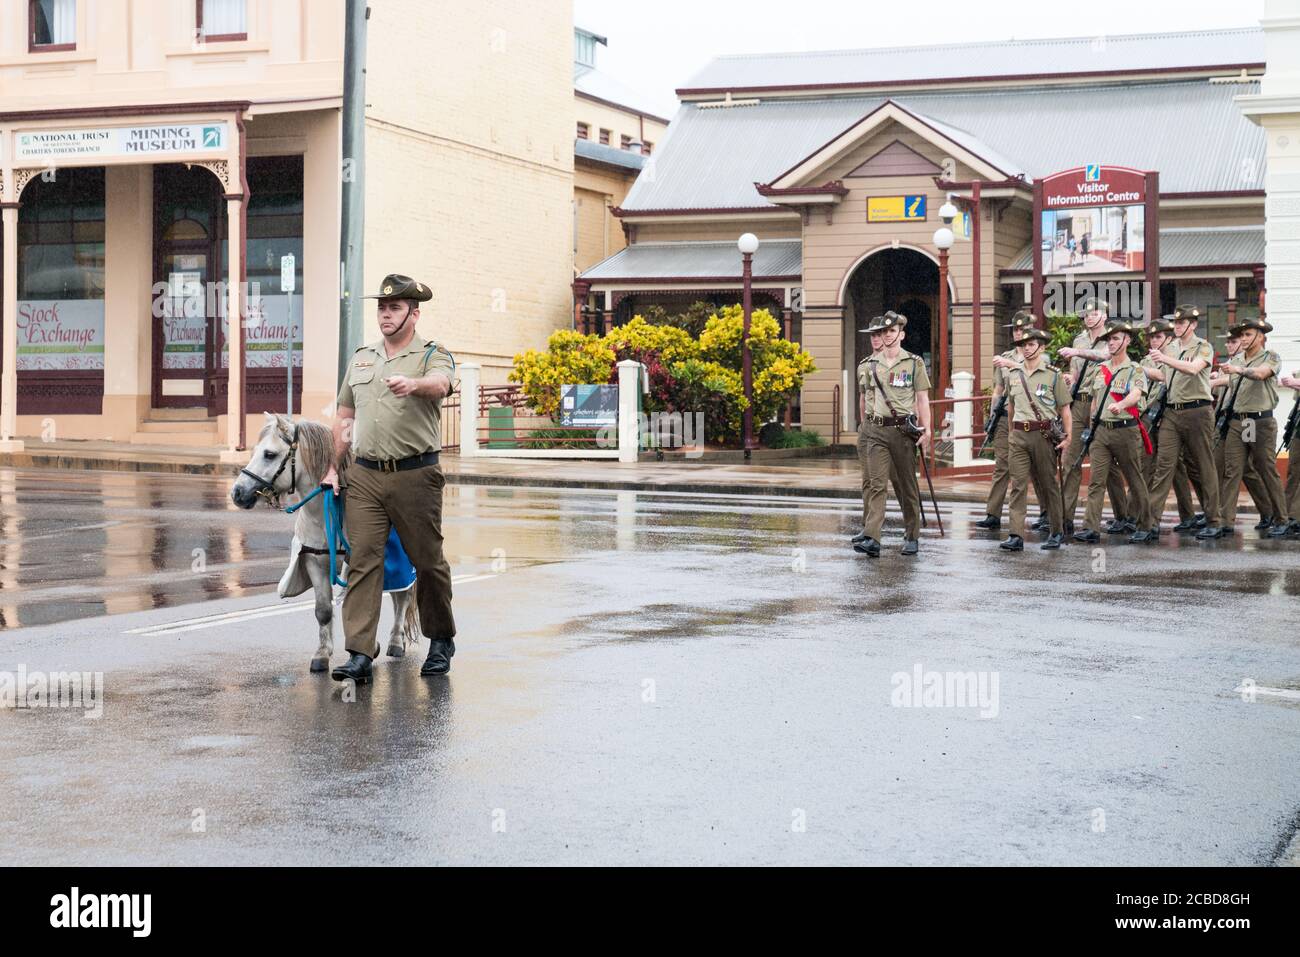 Charters Towers, Australia - April 25, 2019: Shetland pony mascot Septimus Quintus or Seppie leads the Anzac Day march in the rain Stock Photo